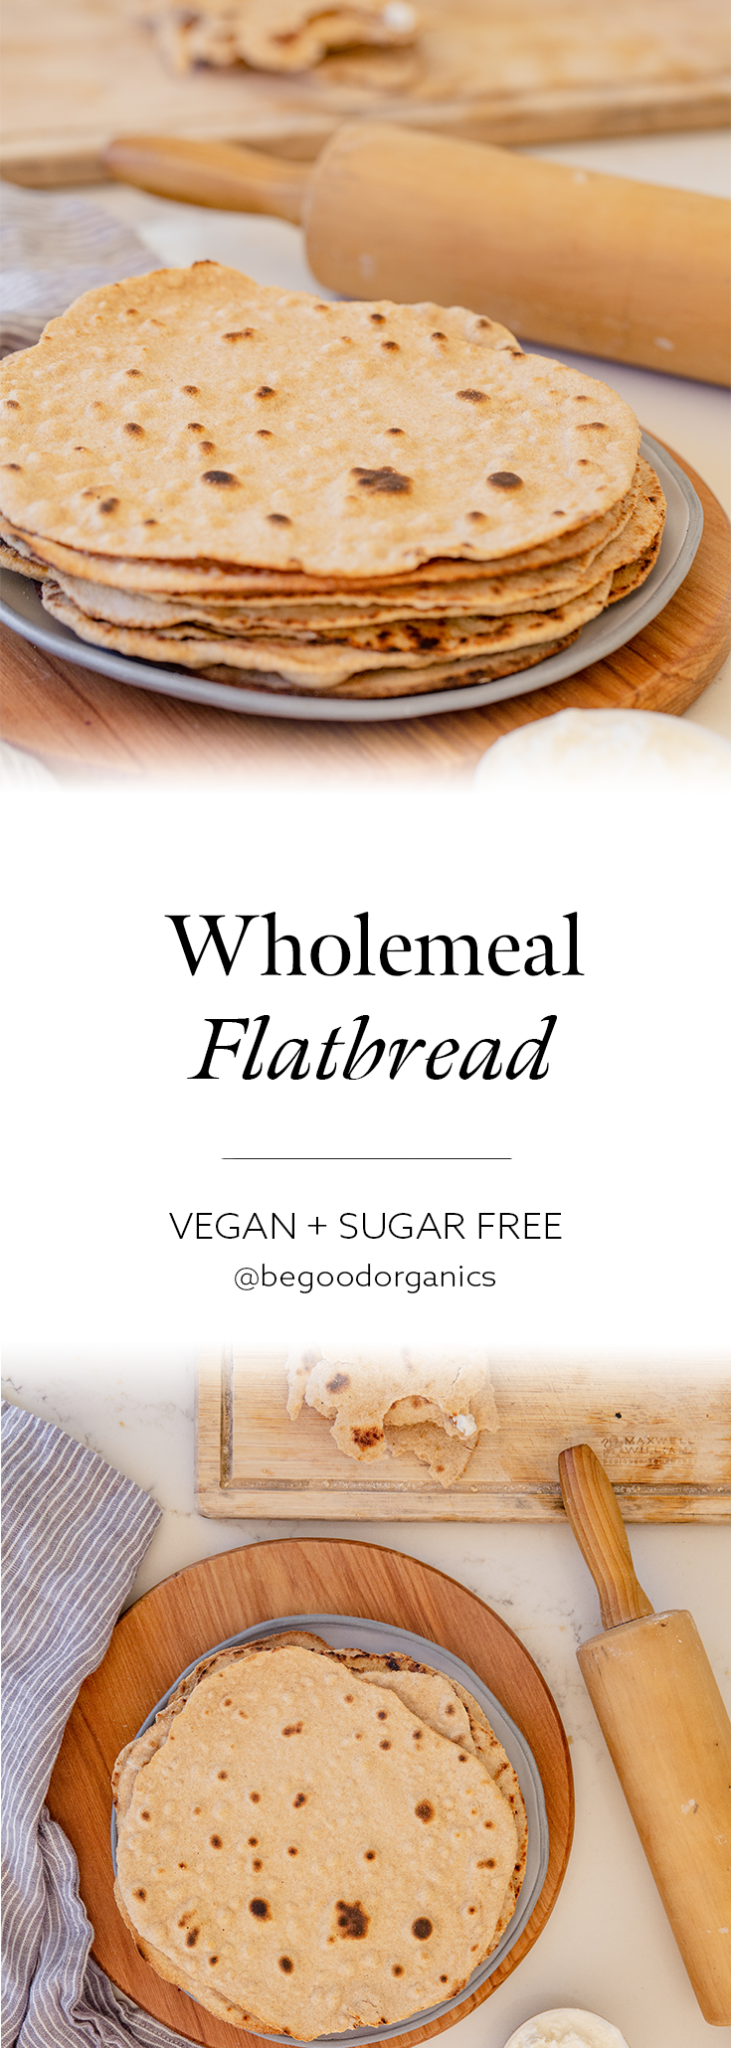 Pin of wholemeal flatbread on blue plate with wooden stand and roller